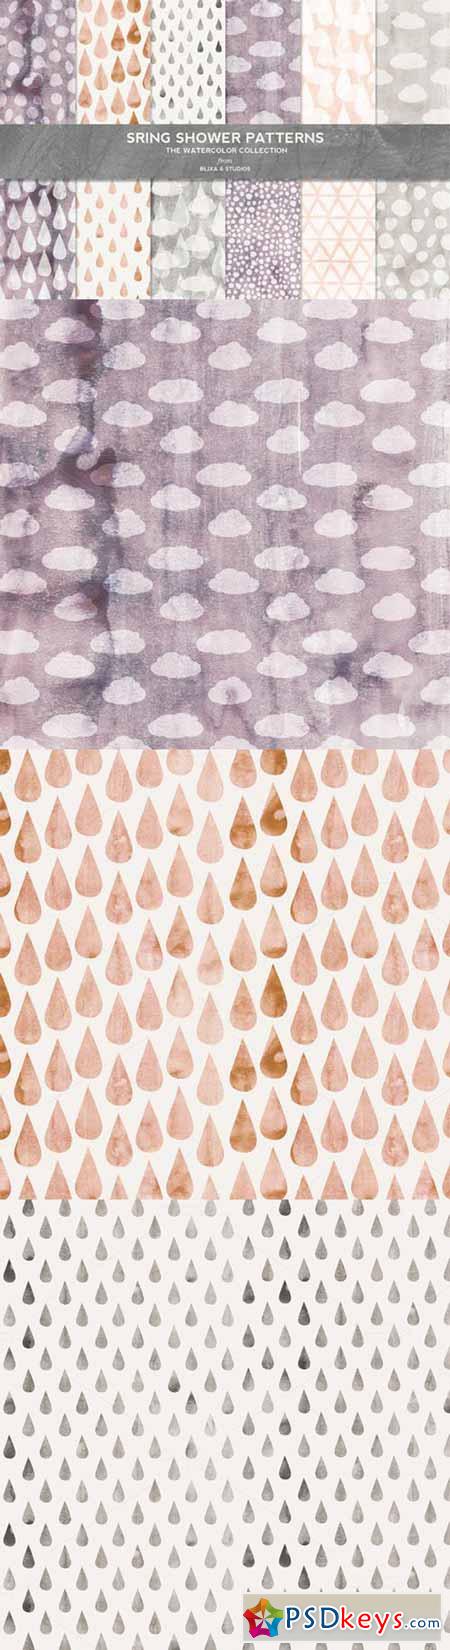 Spring Shower Watercolor Patterns 238329